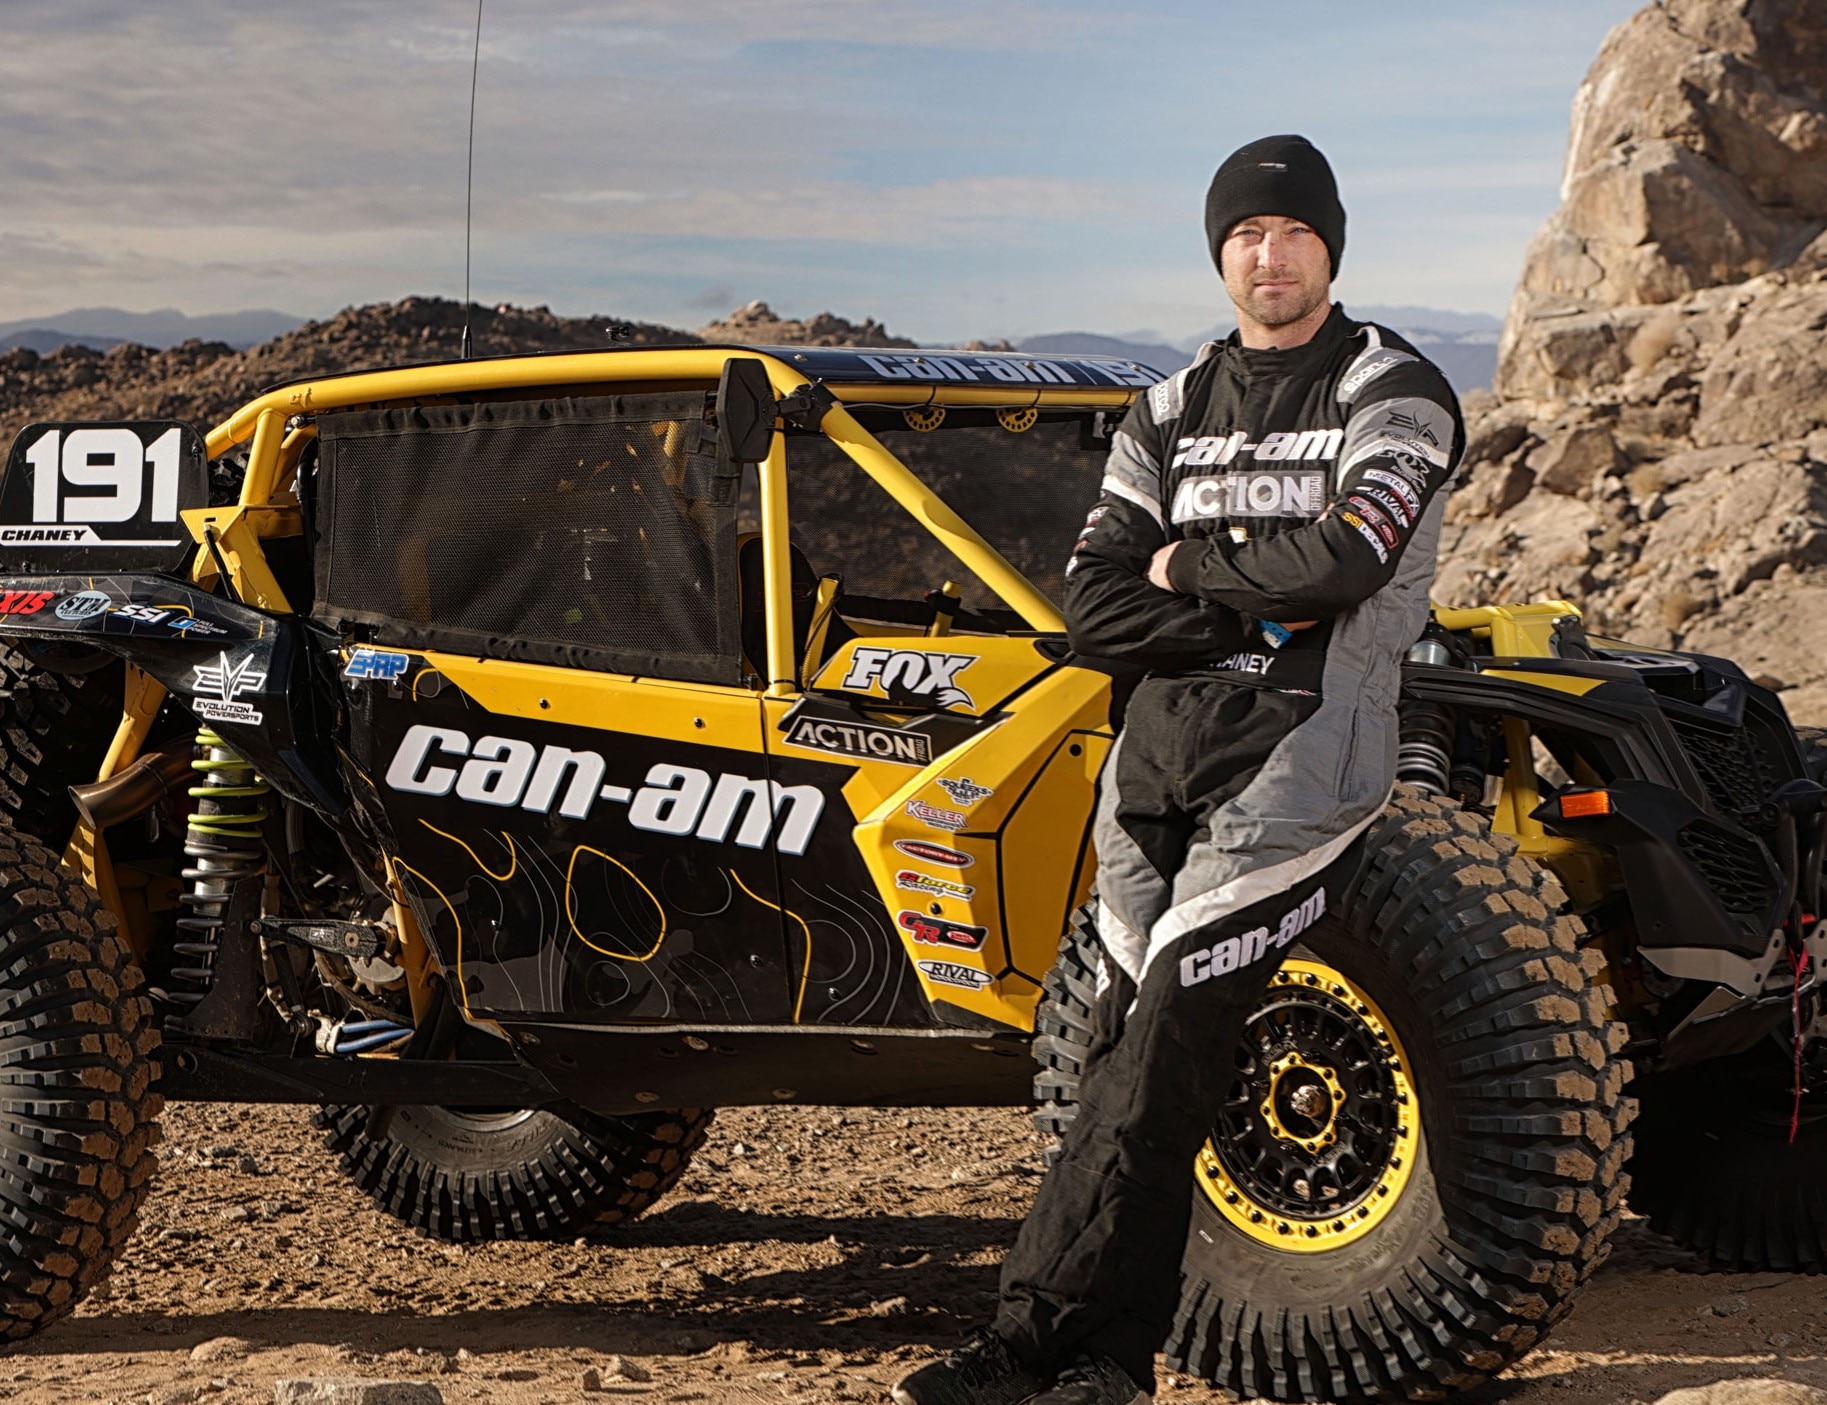 Kyle Chaney Can-Am jinete a King of the hammers